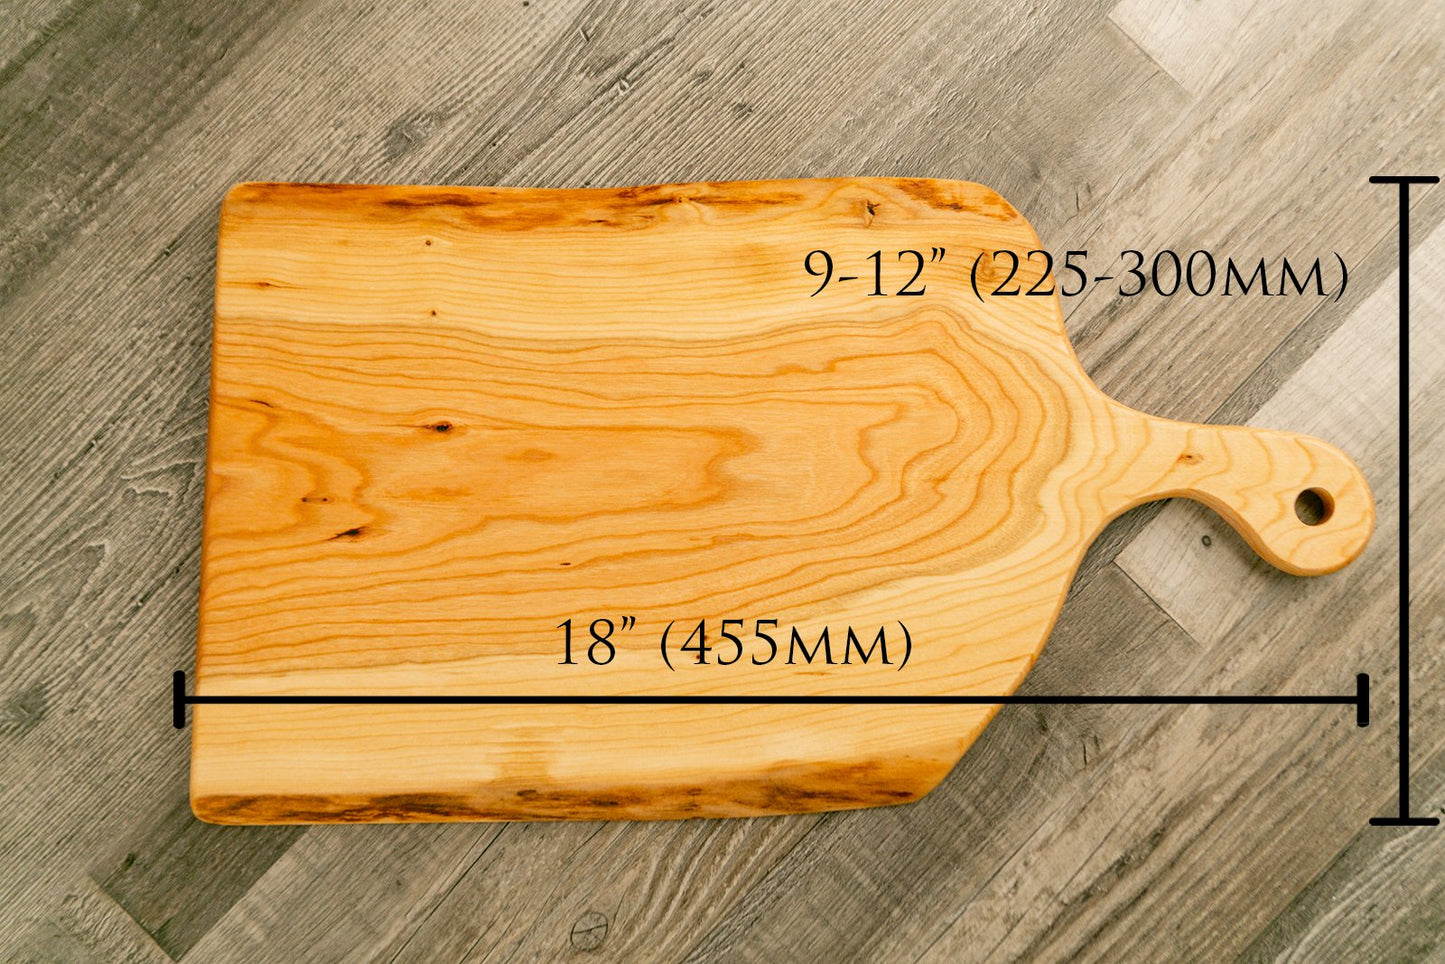 Live-Edge Cherry Artisan Charcuterie/Serving board - 9-12"x 18" with Handle - Etchified-Etchified-2524